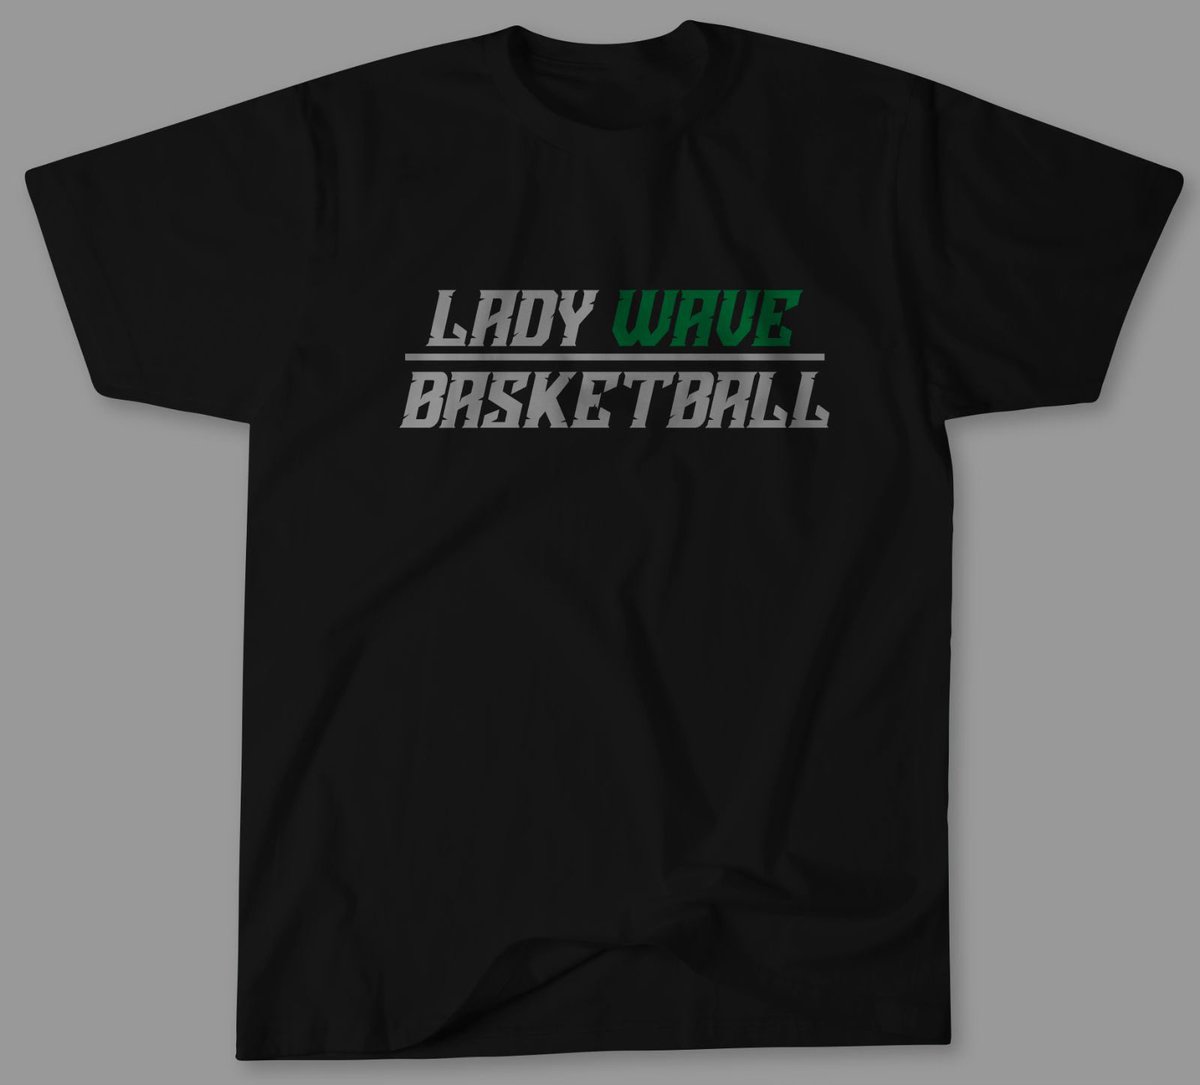 Support our lady wave basketball team! 🏀🏀 Shirts will be sold at the playoff game for $20